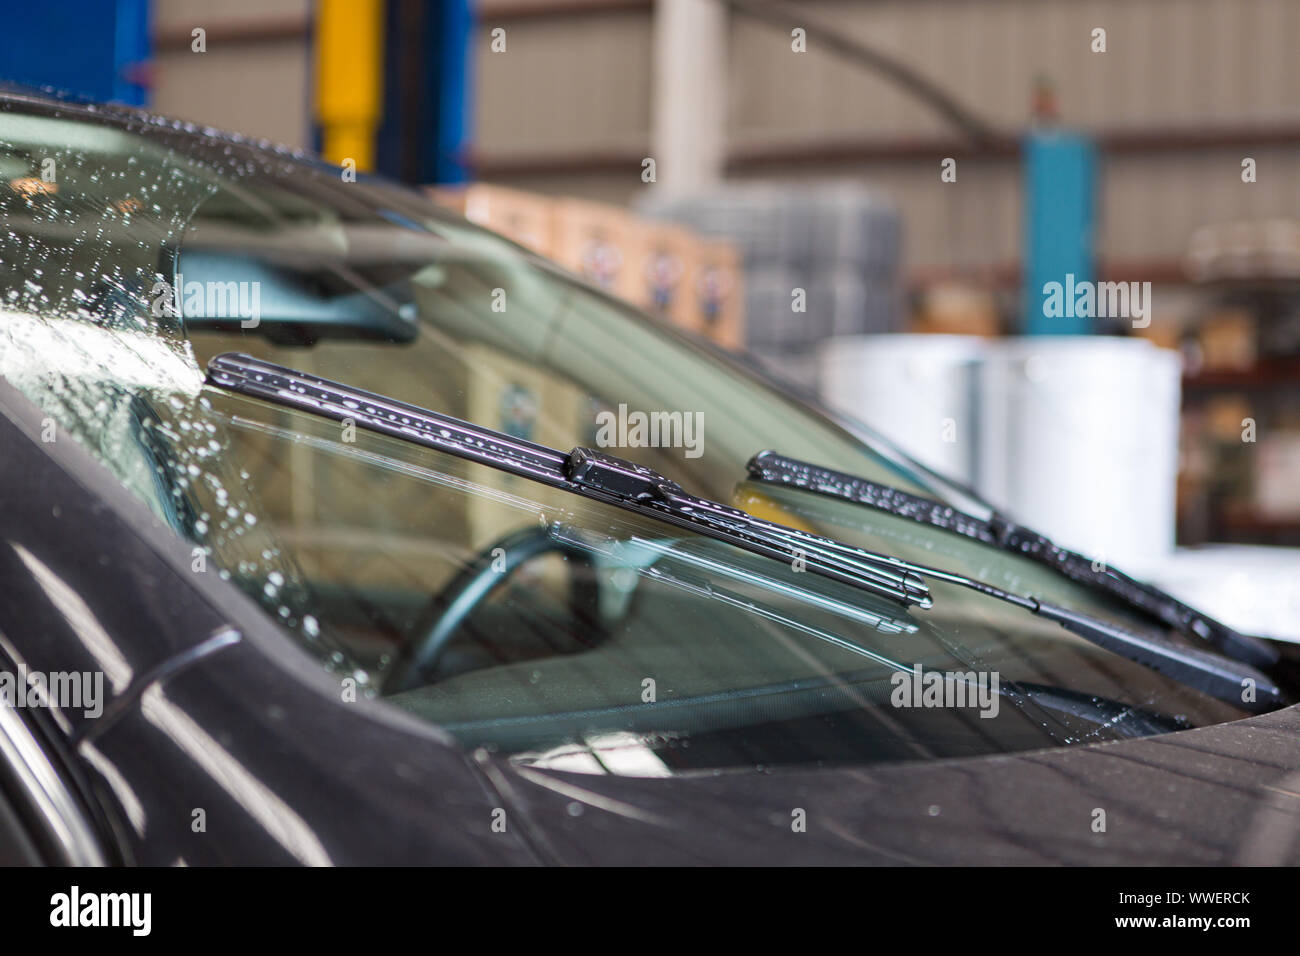 Detailed view of car windshield wipers while they are being used Stock Photo